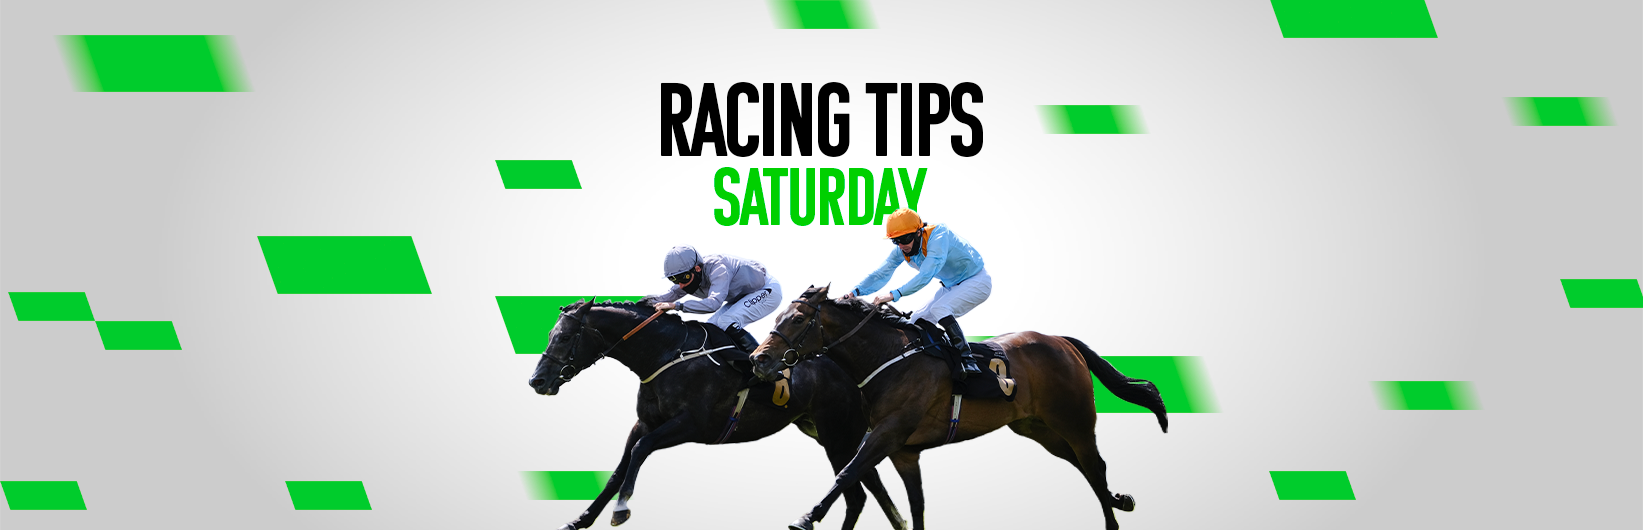 Saturday racing tips: Best bets for Newbury and Fairyhouse